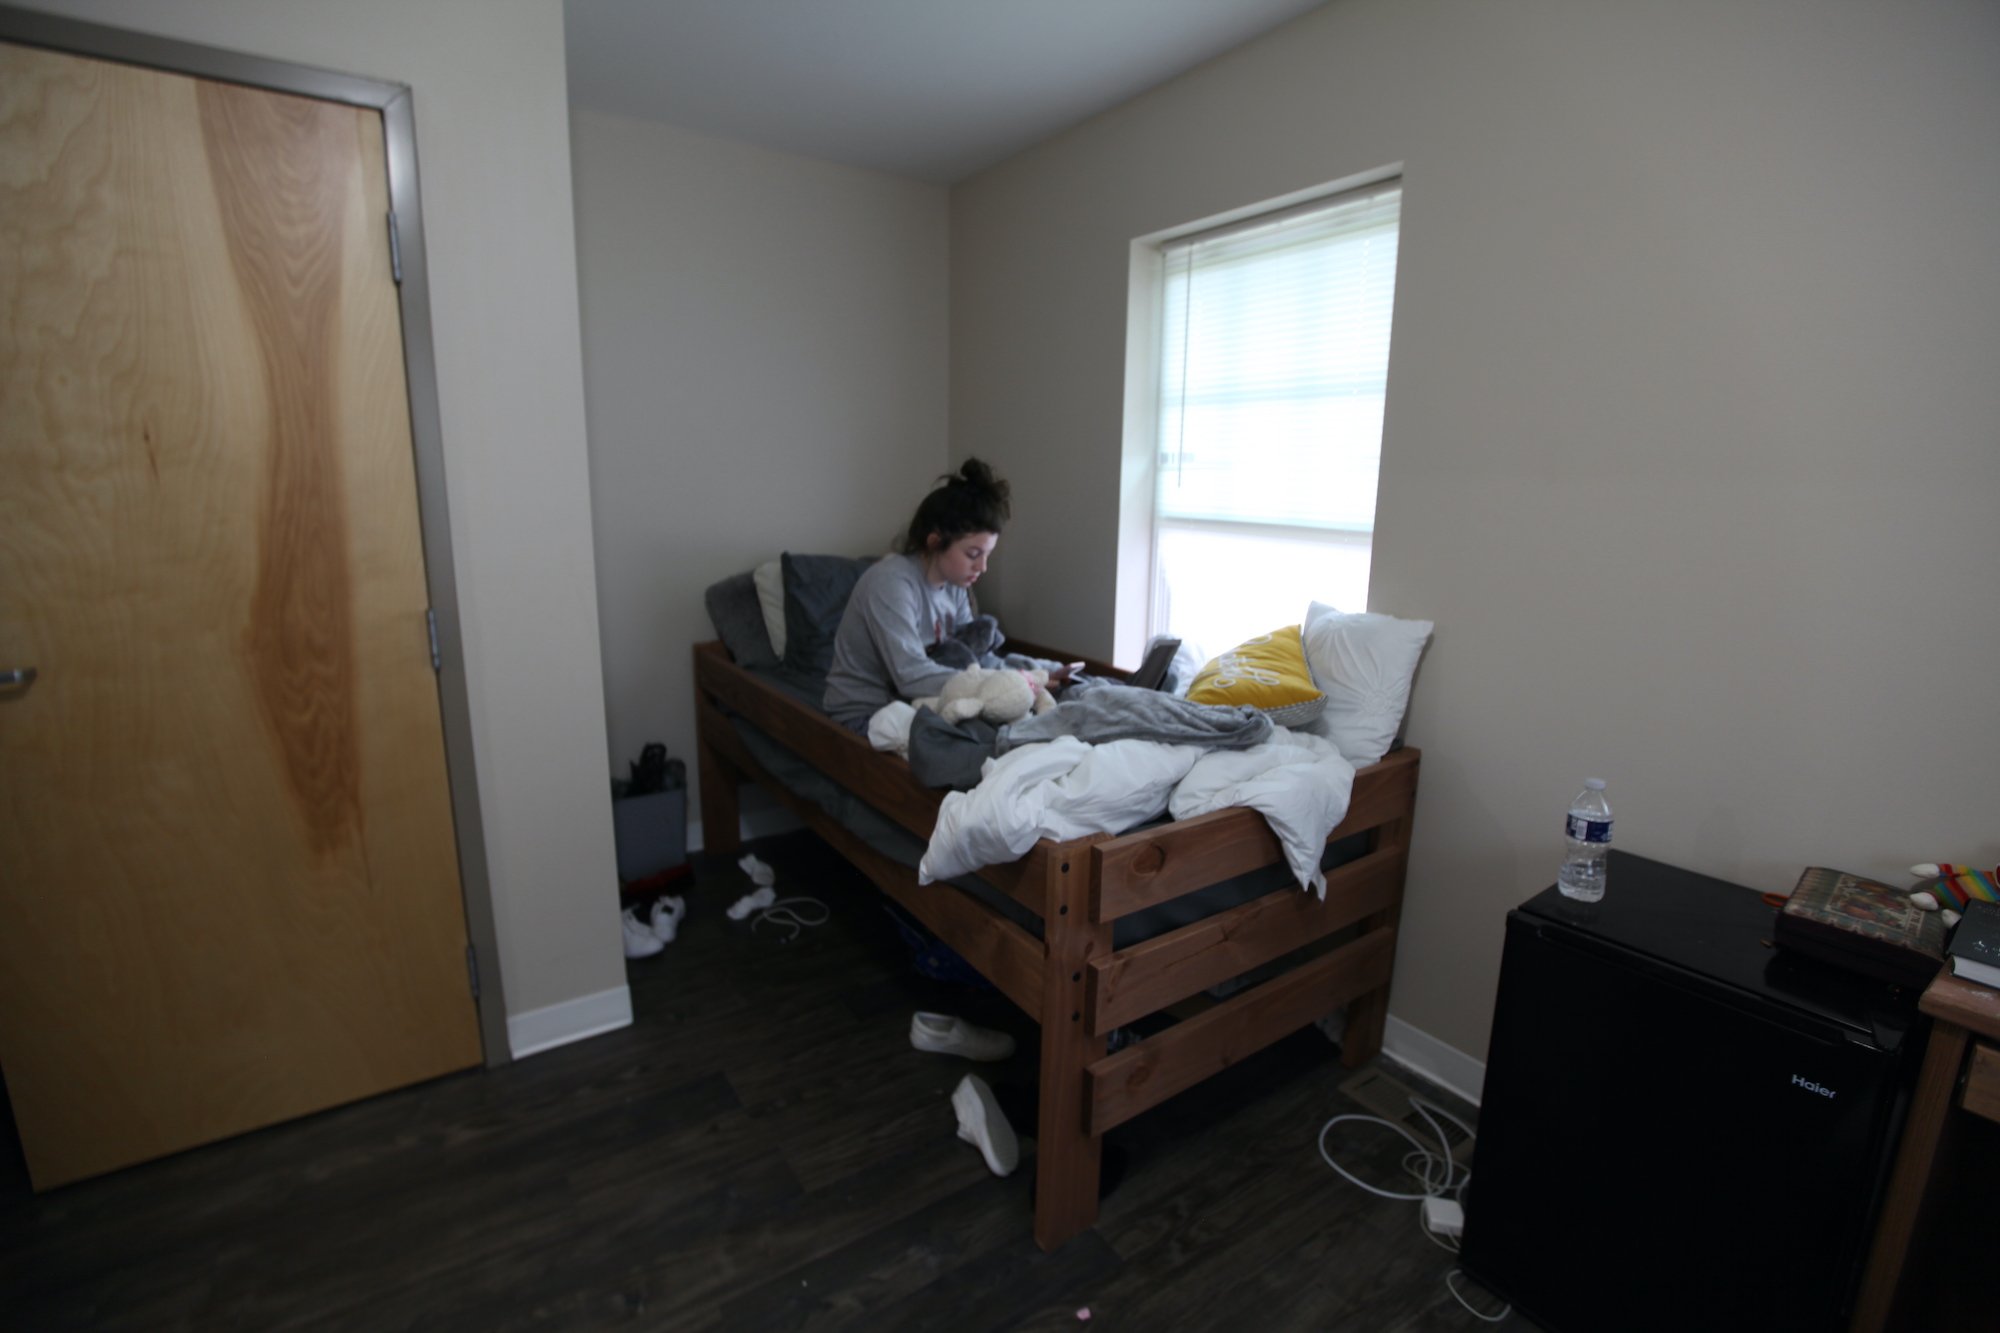 A girl sitting on a dorm bed